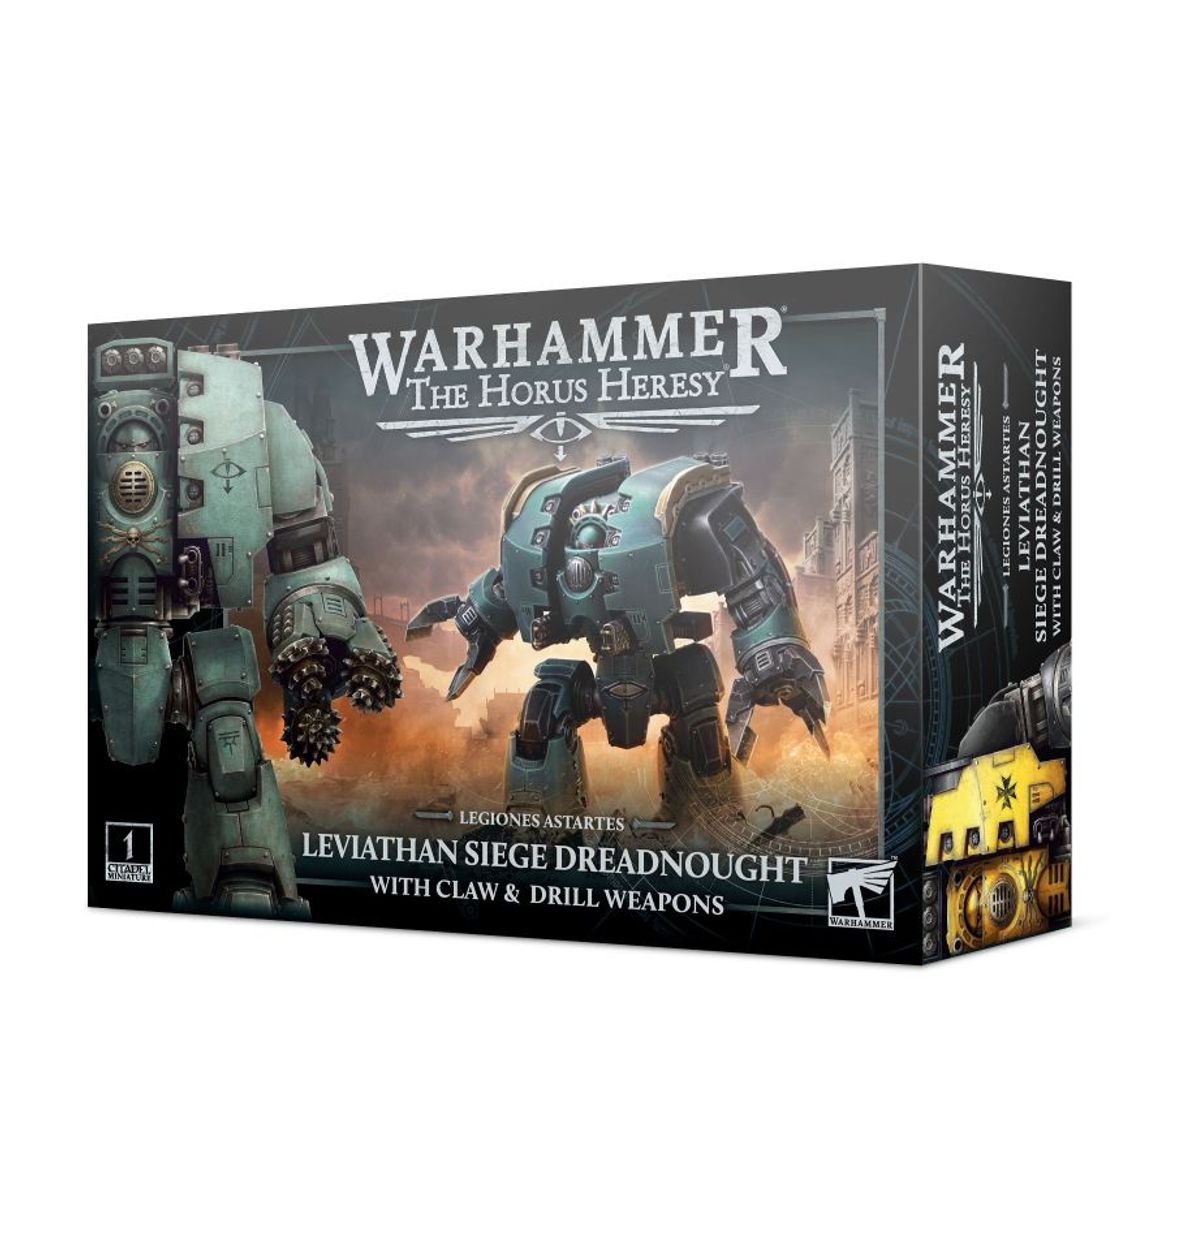 Warhammer: The Horus Heresy - Leviathan Siege Dreadnought W/ Claw & Drill Weapon